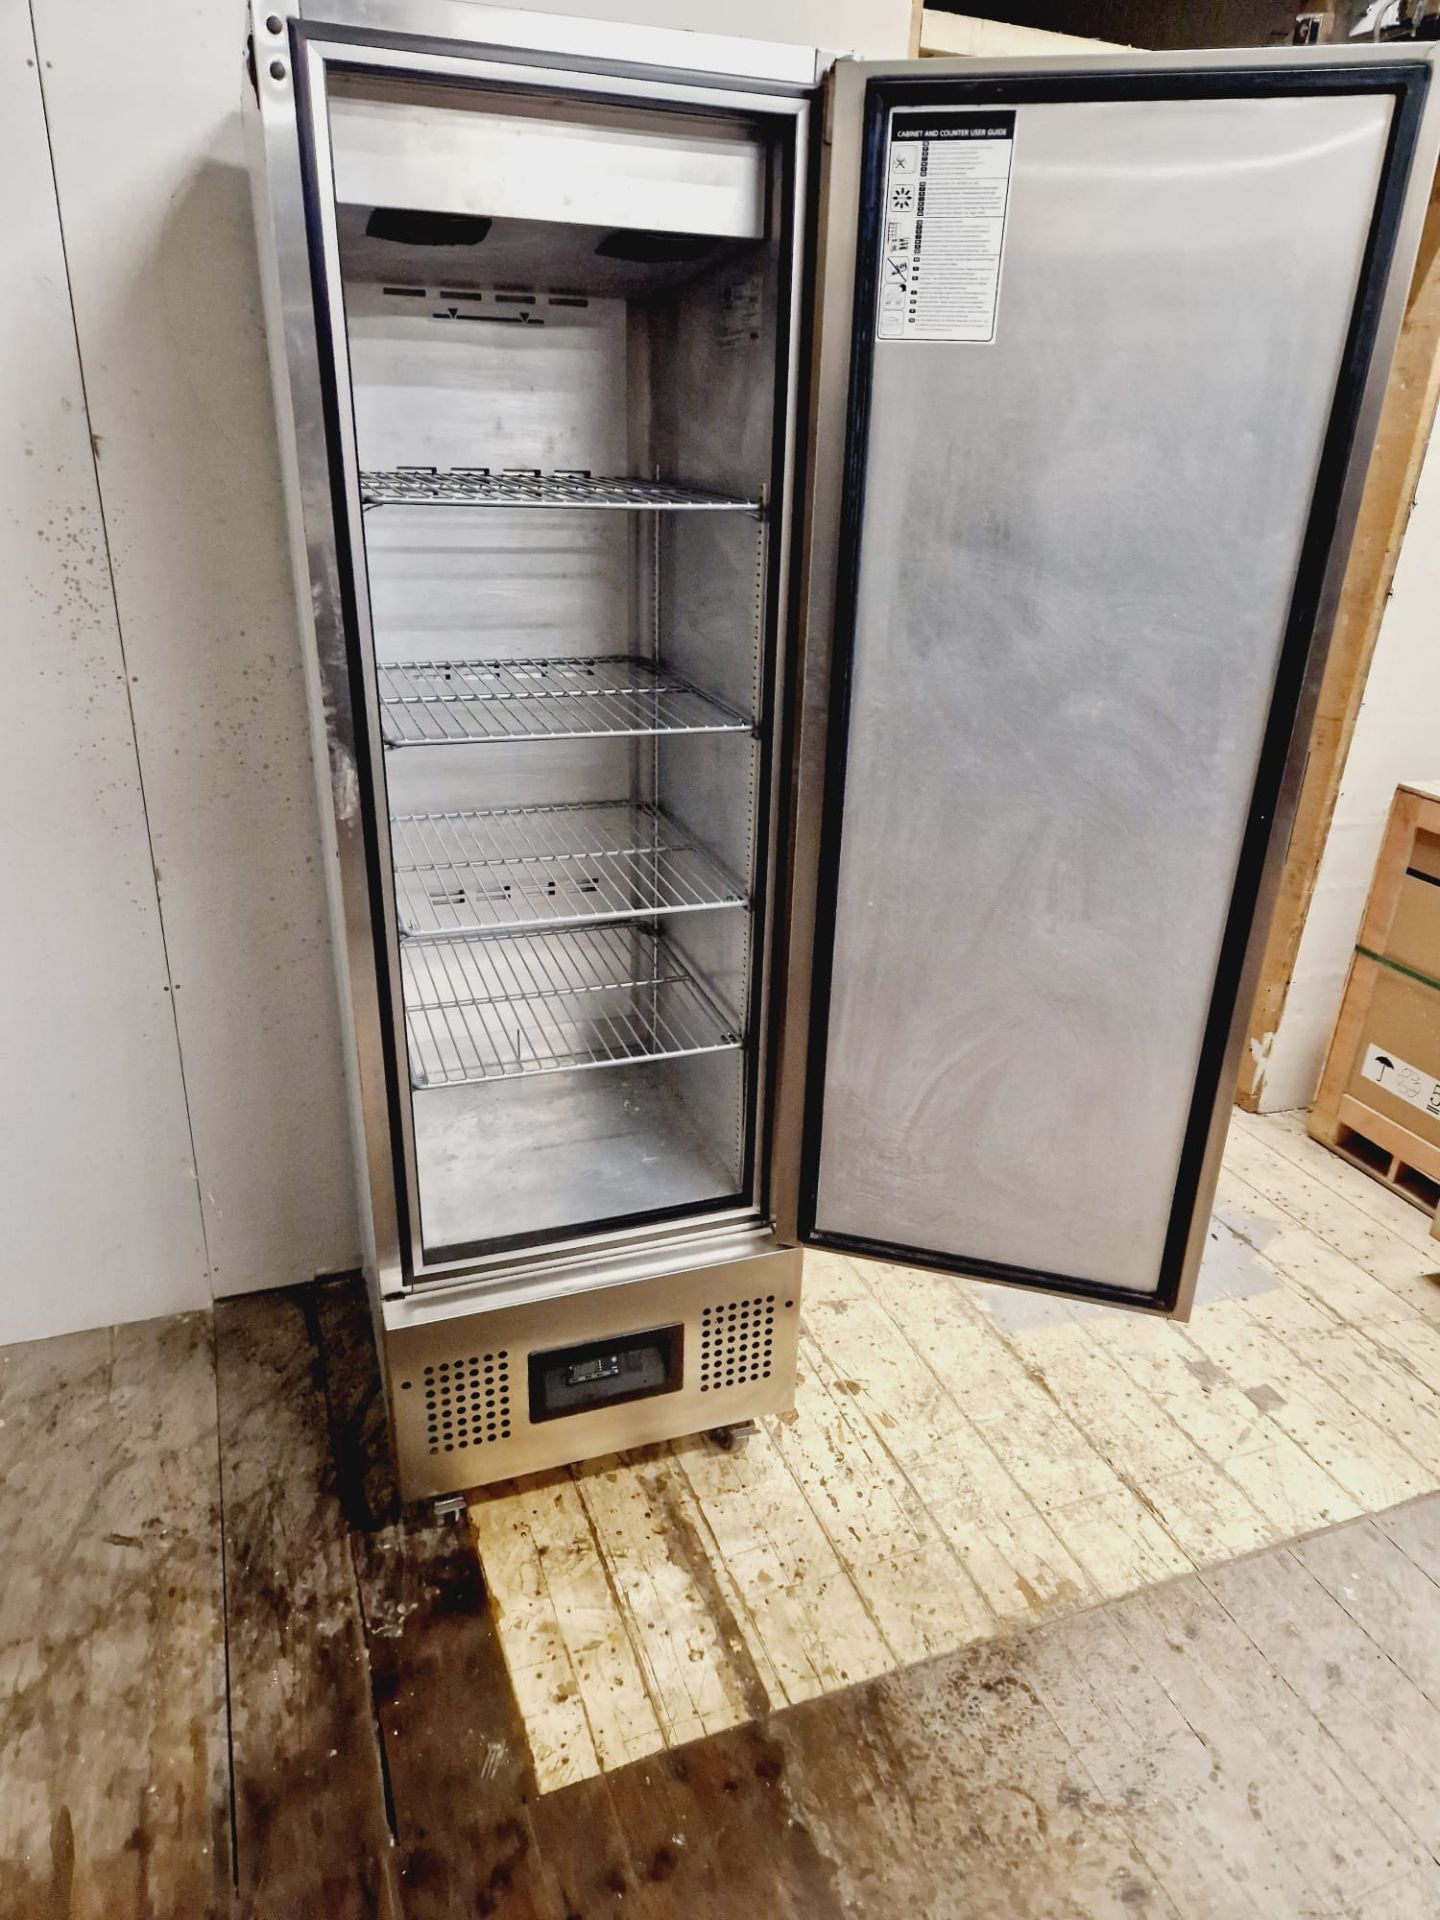 FOSTER SLIM LINE FREEZER - 450 LITRE - FULLY SERVICED AND WORKING - Image 2 of 3